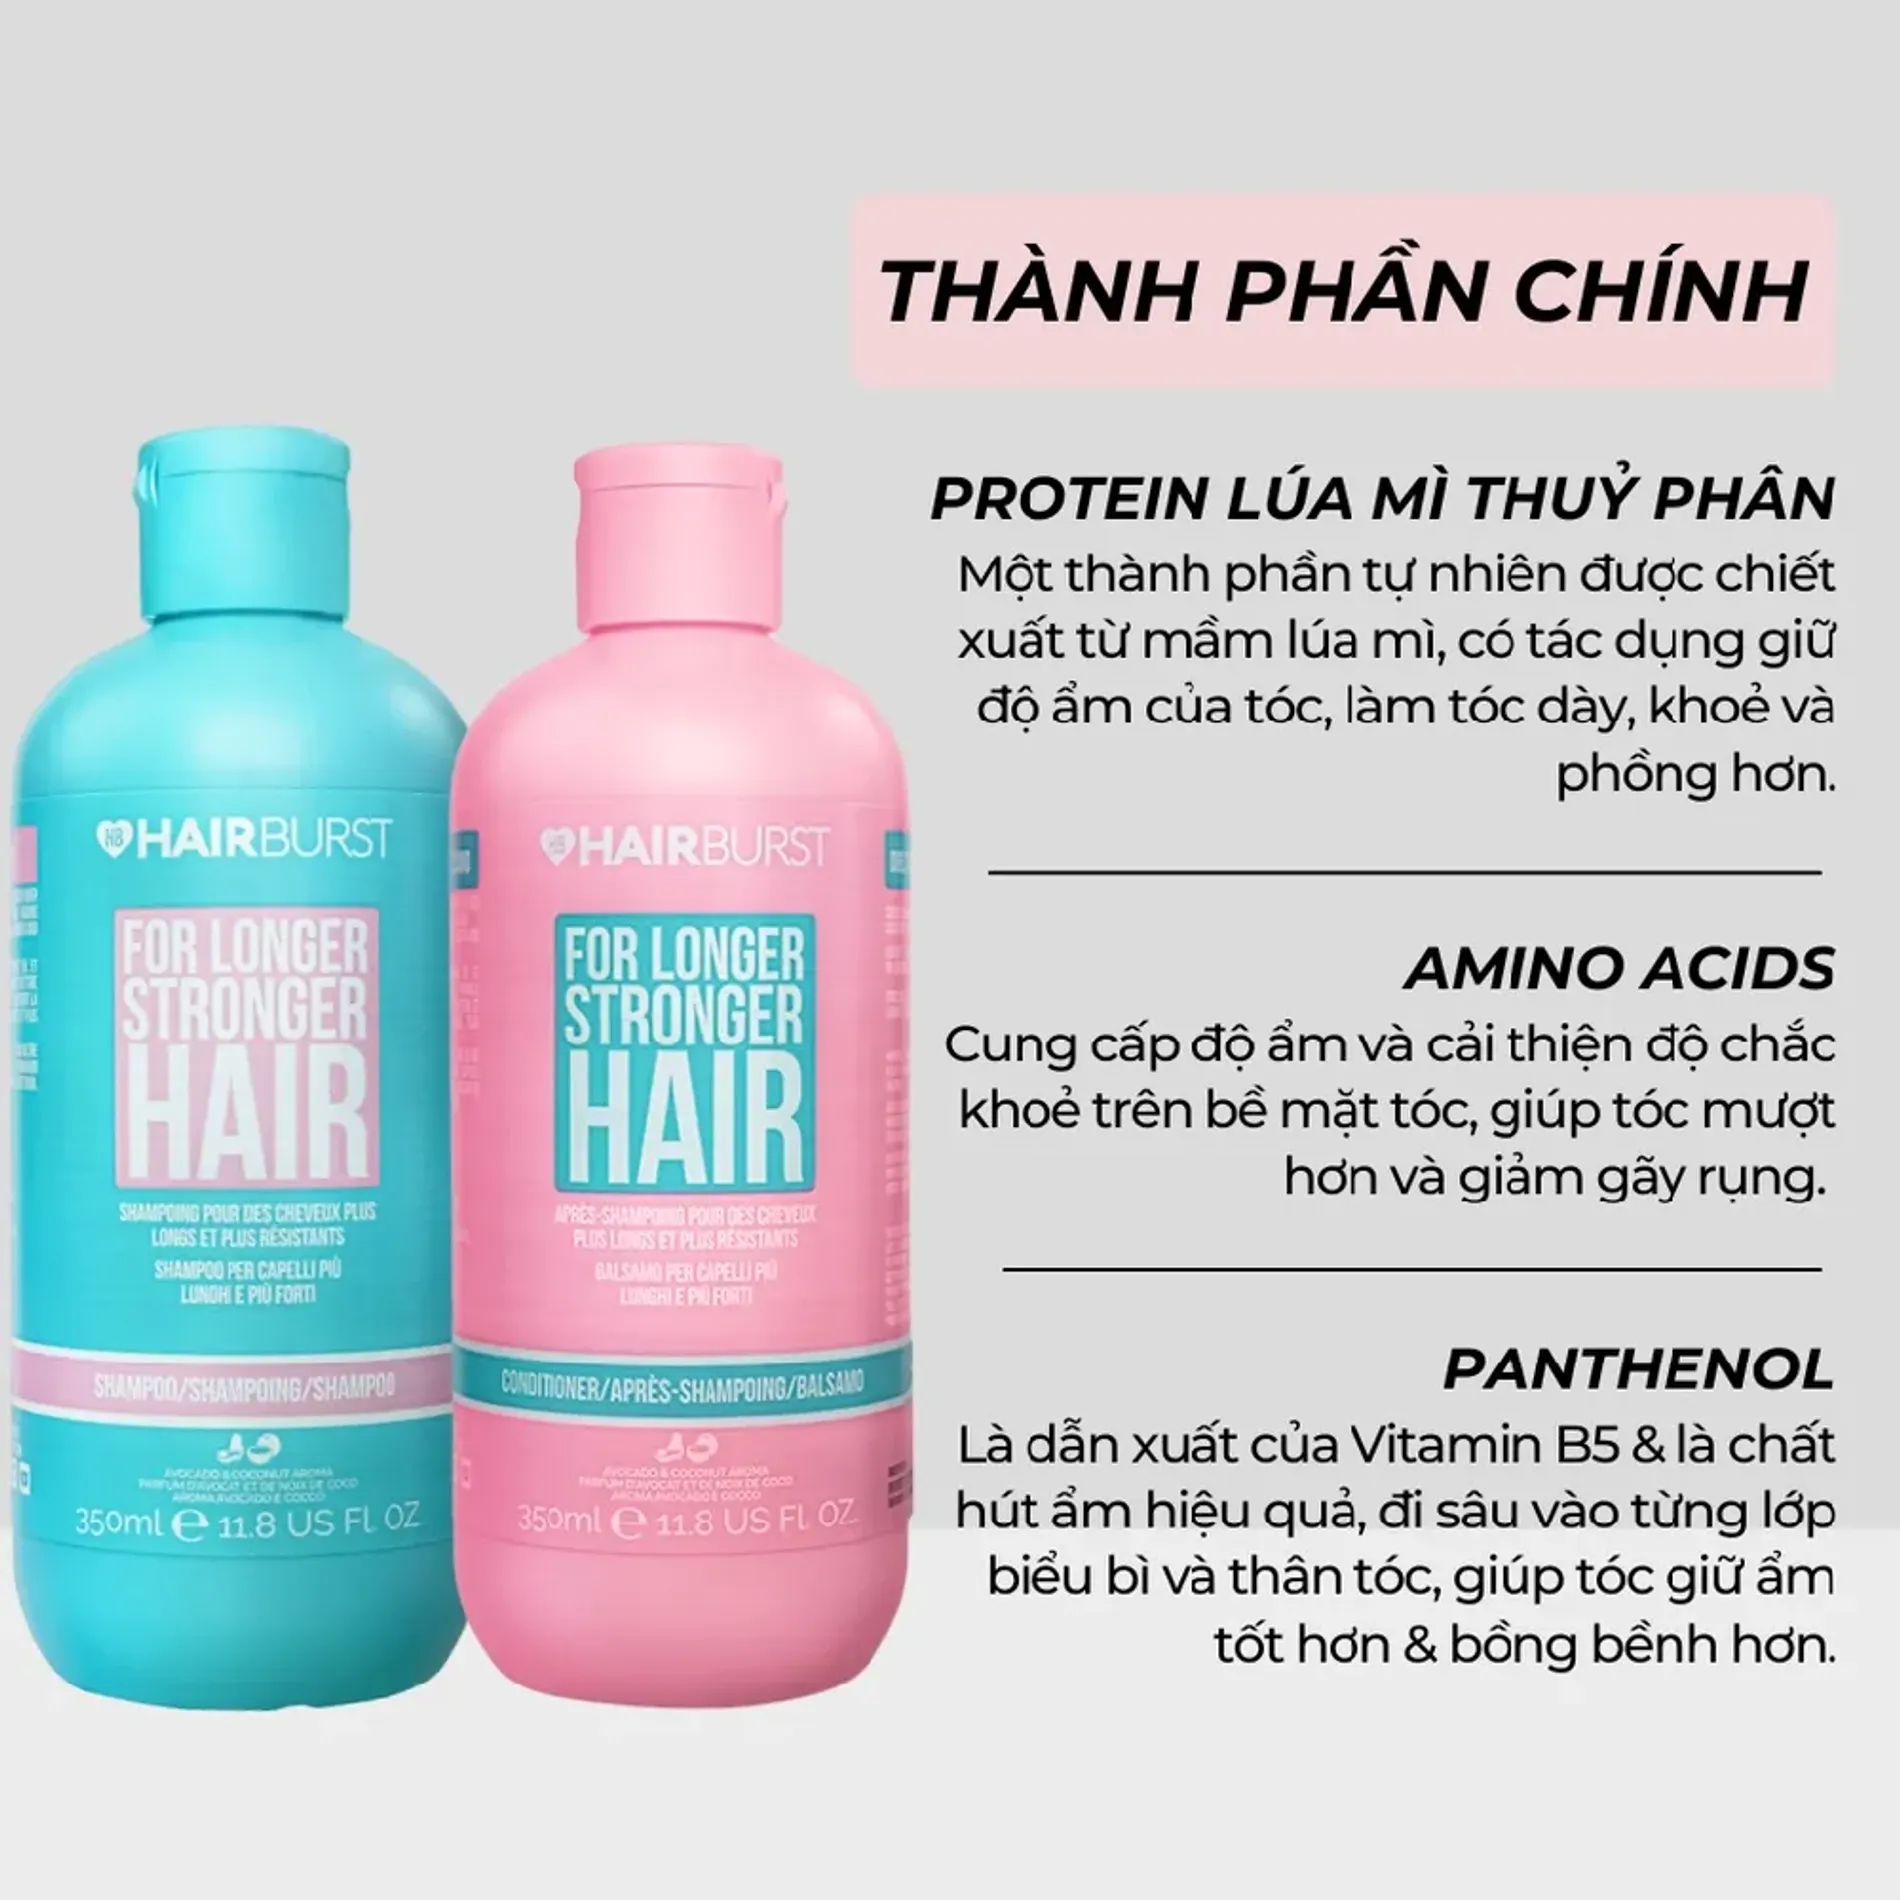 set-goi-xa-kich-thich-moc-toc-hairburst-for-longer-and-stronger-hair-3